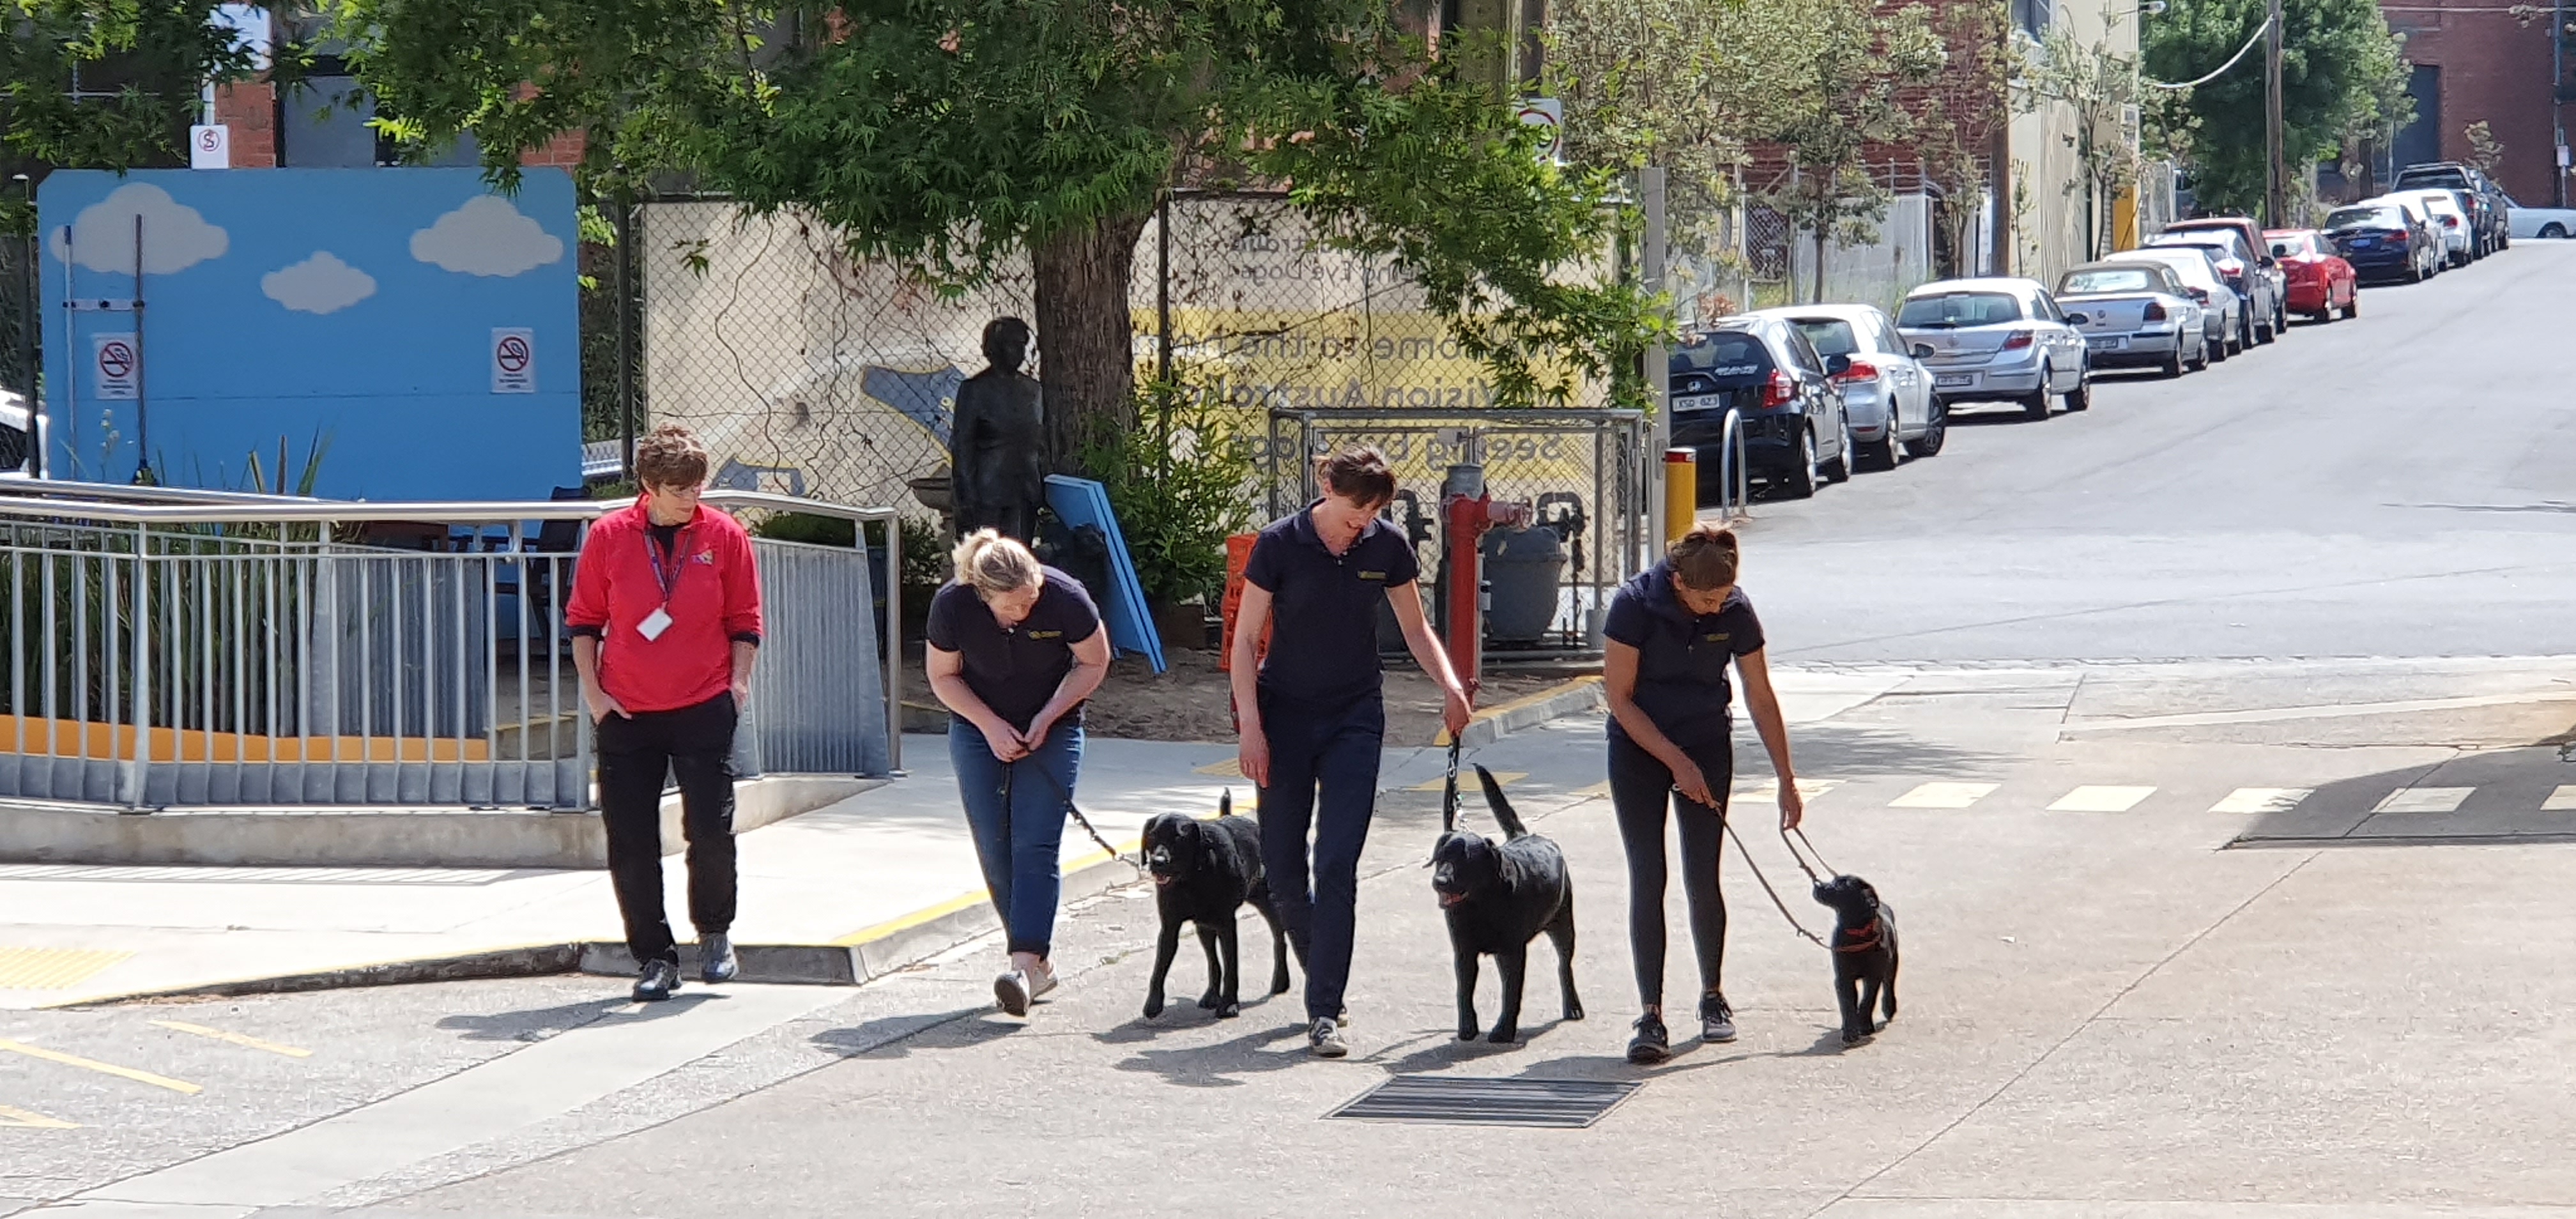 Jane Russenberger leads a physical demonstration with Seeing Eye Dogs staff in our car park.